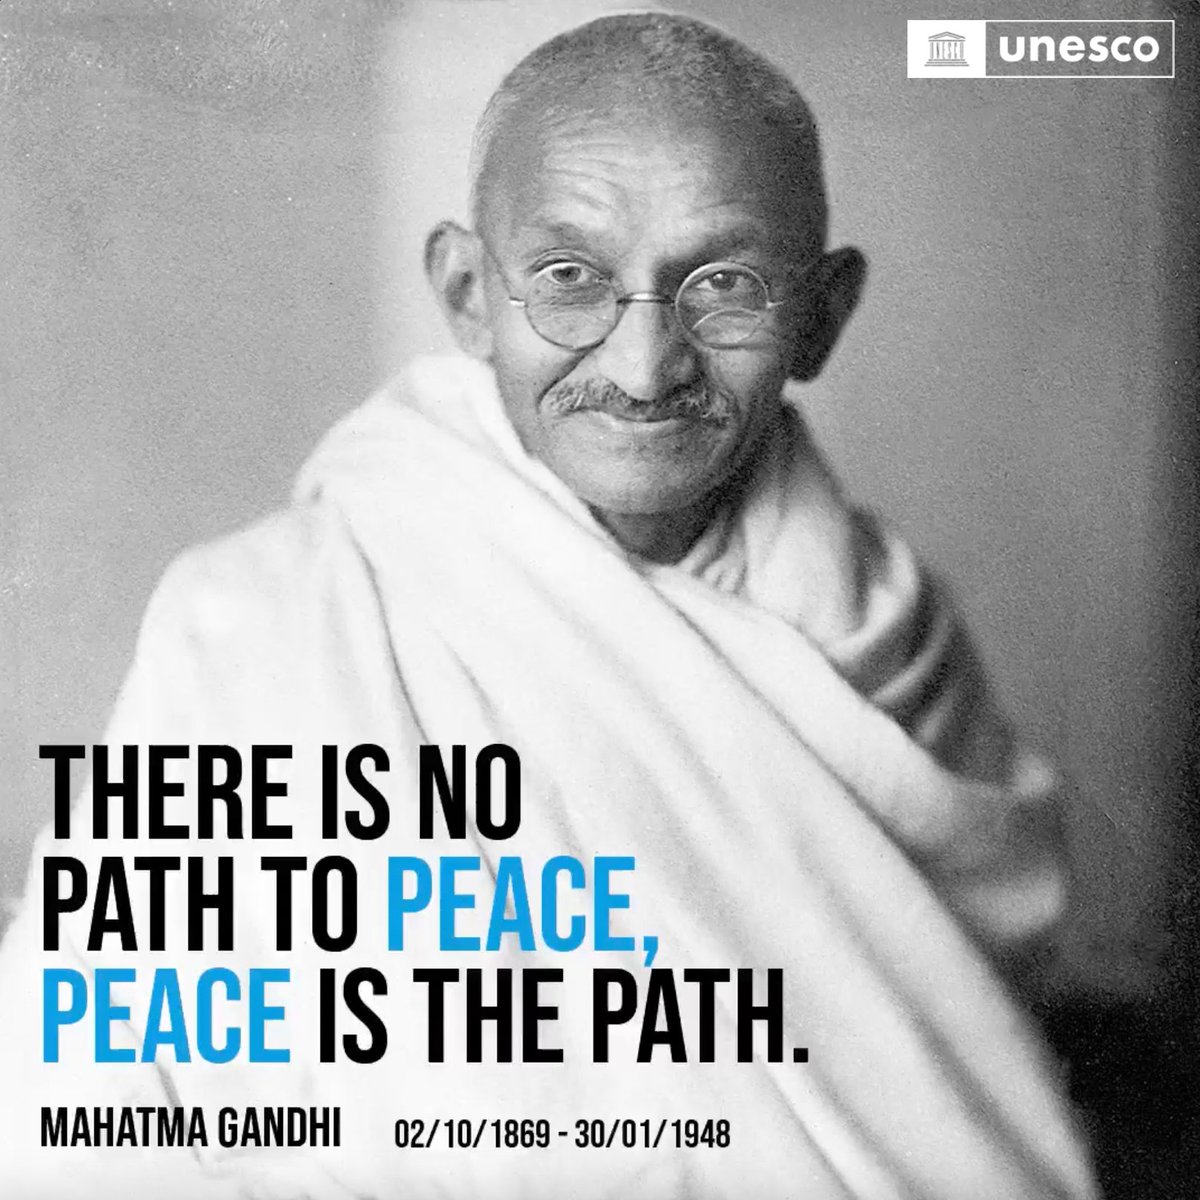 “Non-violence is the greatest force at the disposal of humankind”- Gandhi On today's #NonViolenceDay and anniversary of his birth, let’s honour Gandhi’s values & struggle for universal peace all around the world! 📰 on.unesco.org/3GaugjF